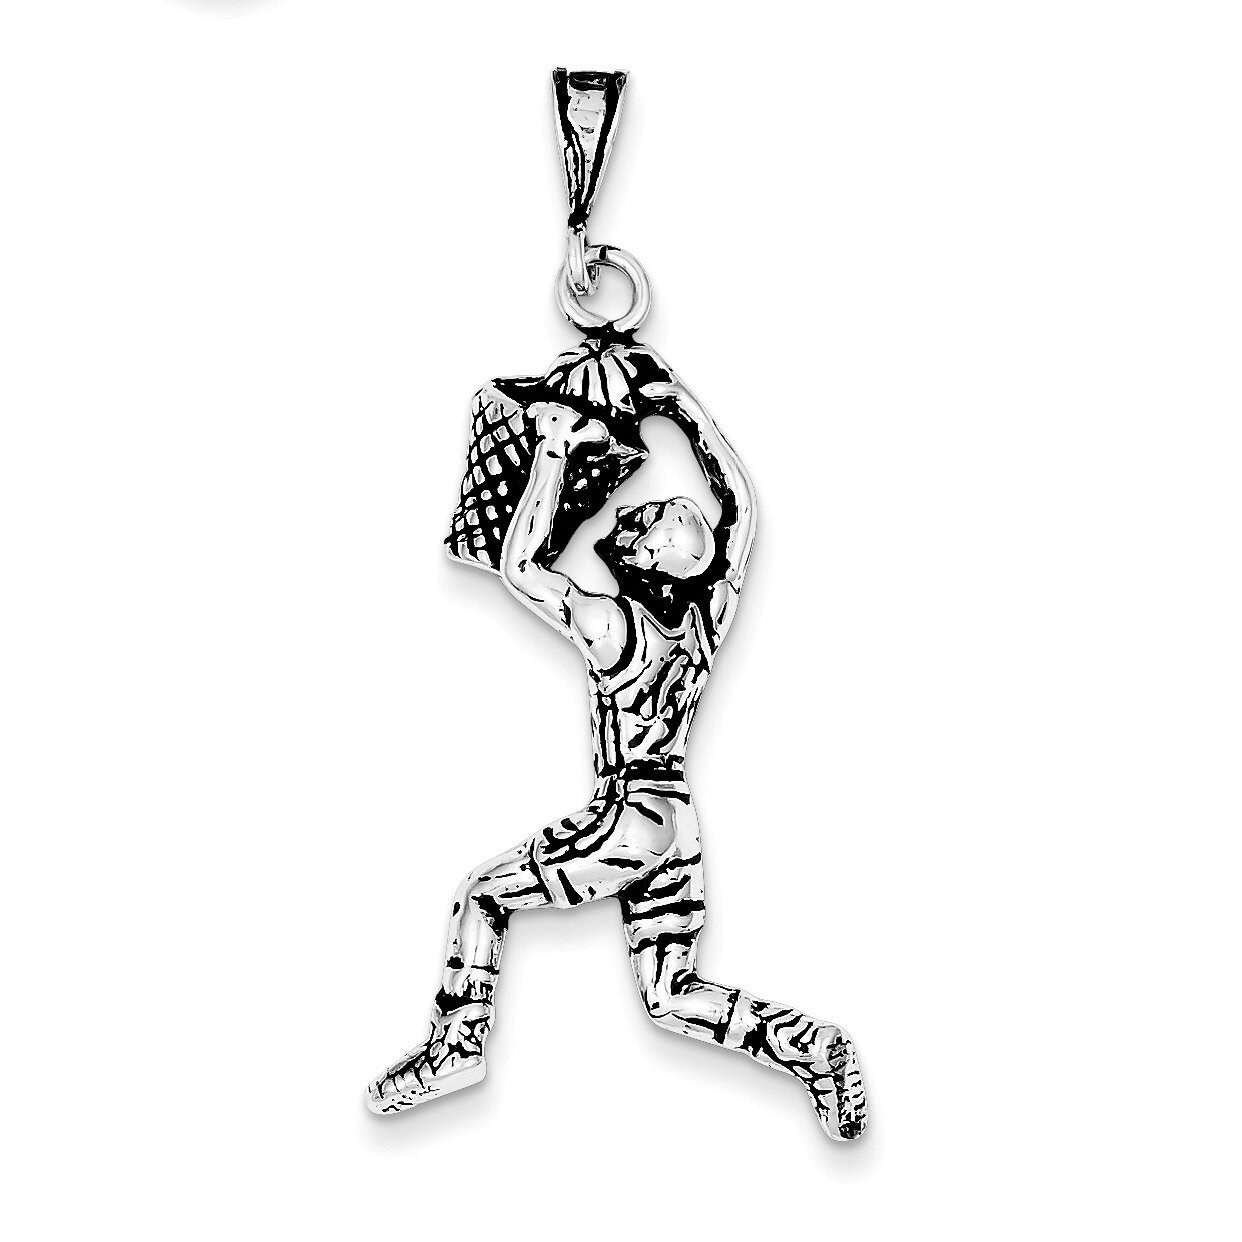 Basketball Player Charm Antiqued Sterling Silver QC7919